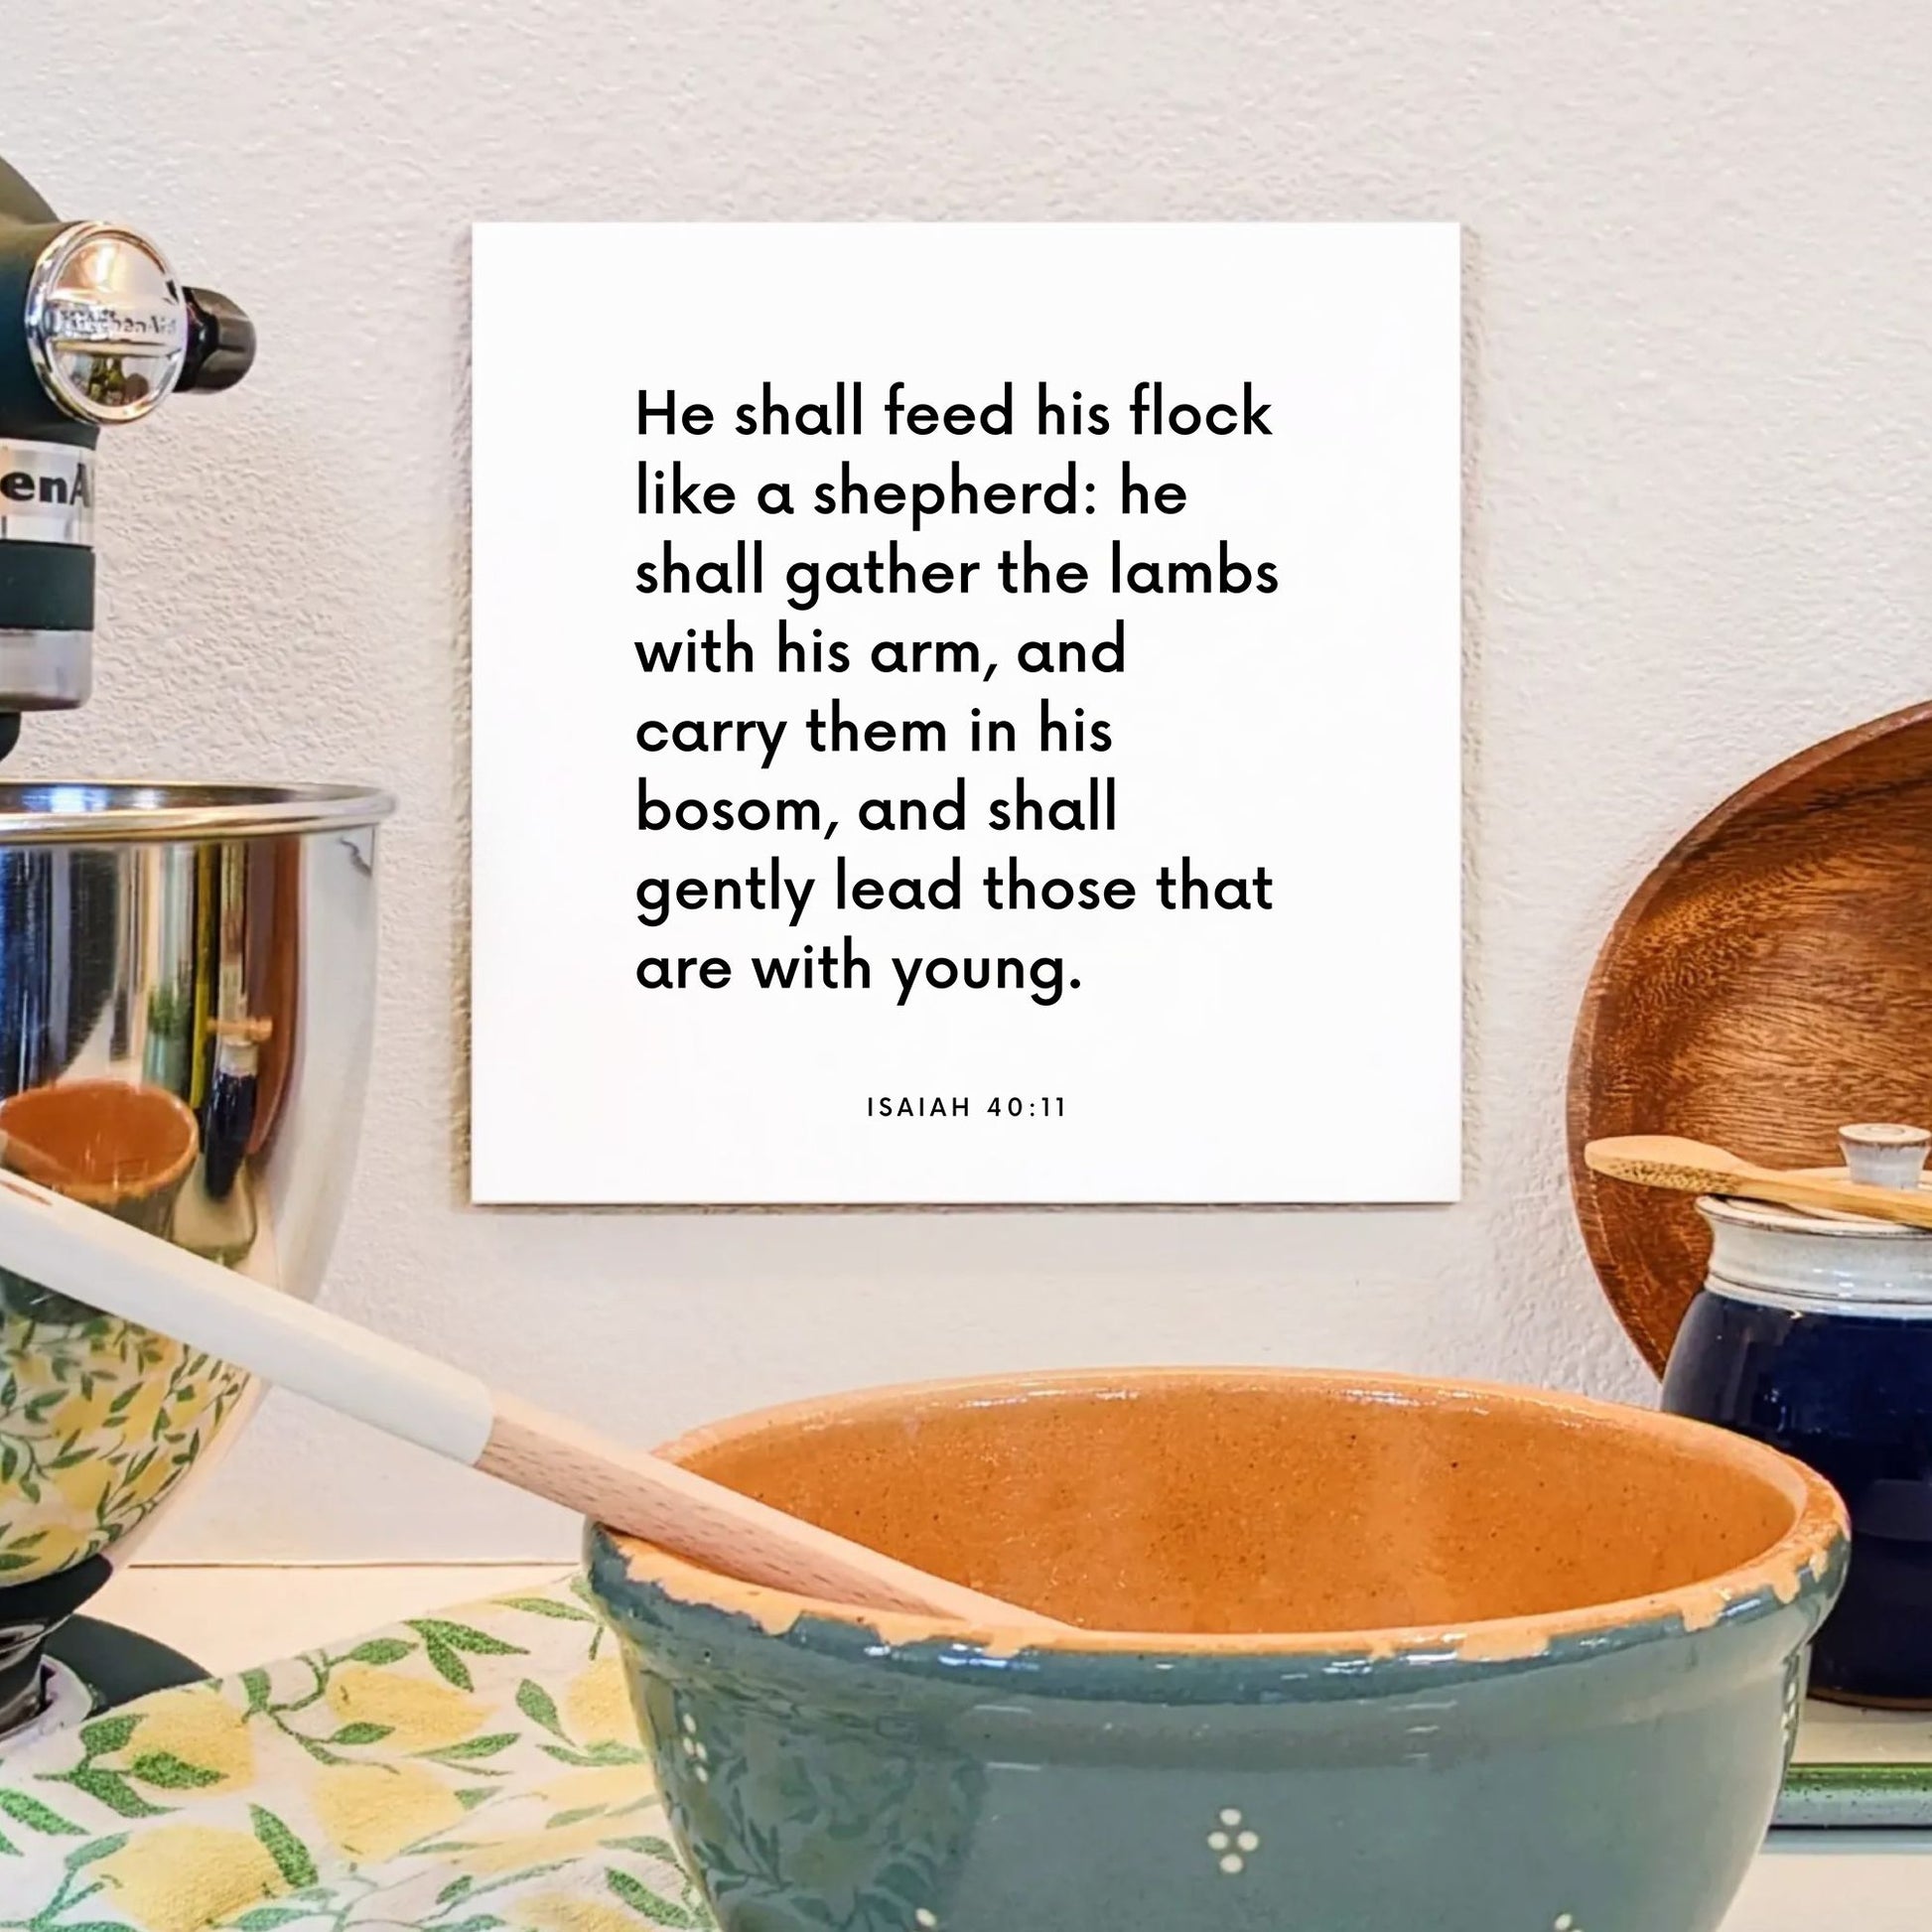 Kitchen mouting of the scripture tile for Isaiah 40:11 - "He shall feed his flock like a shepherd"